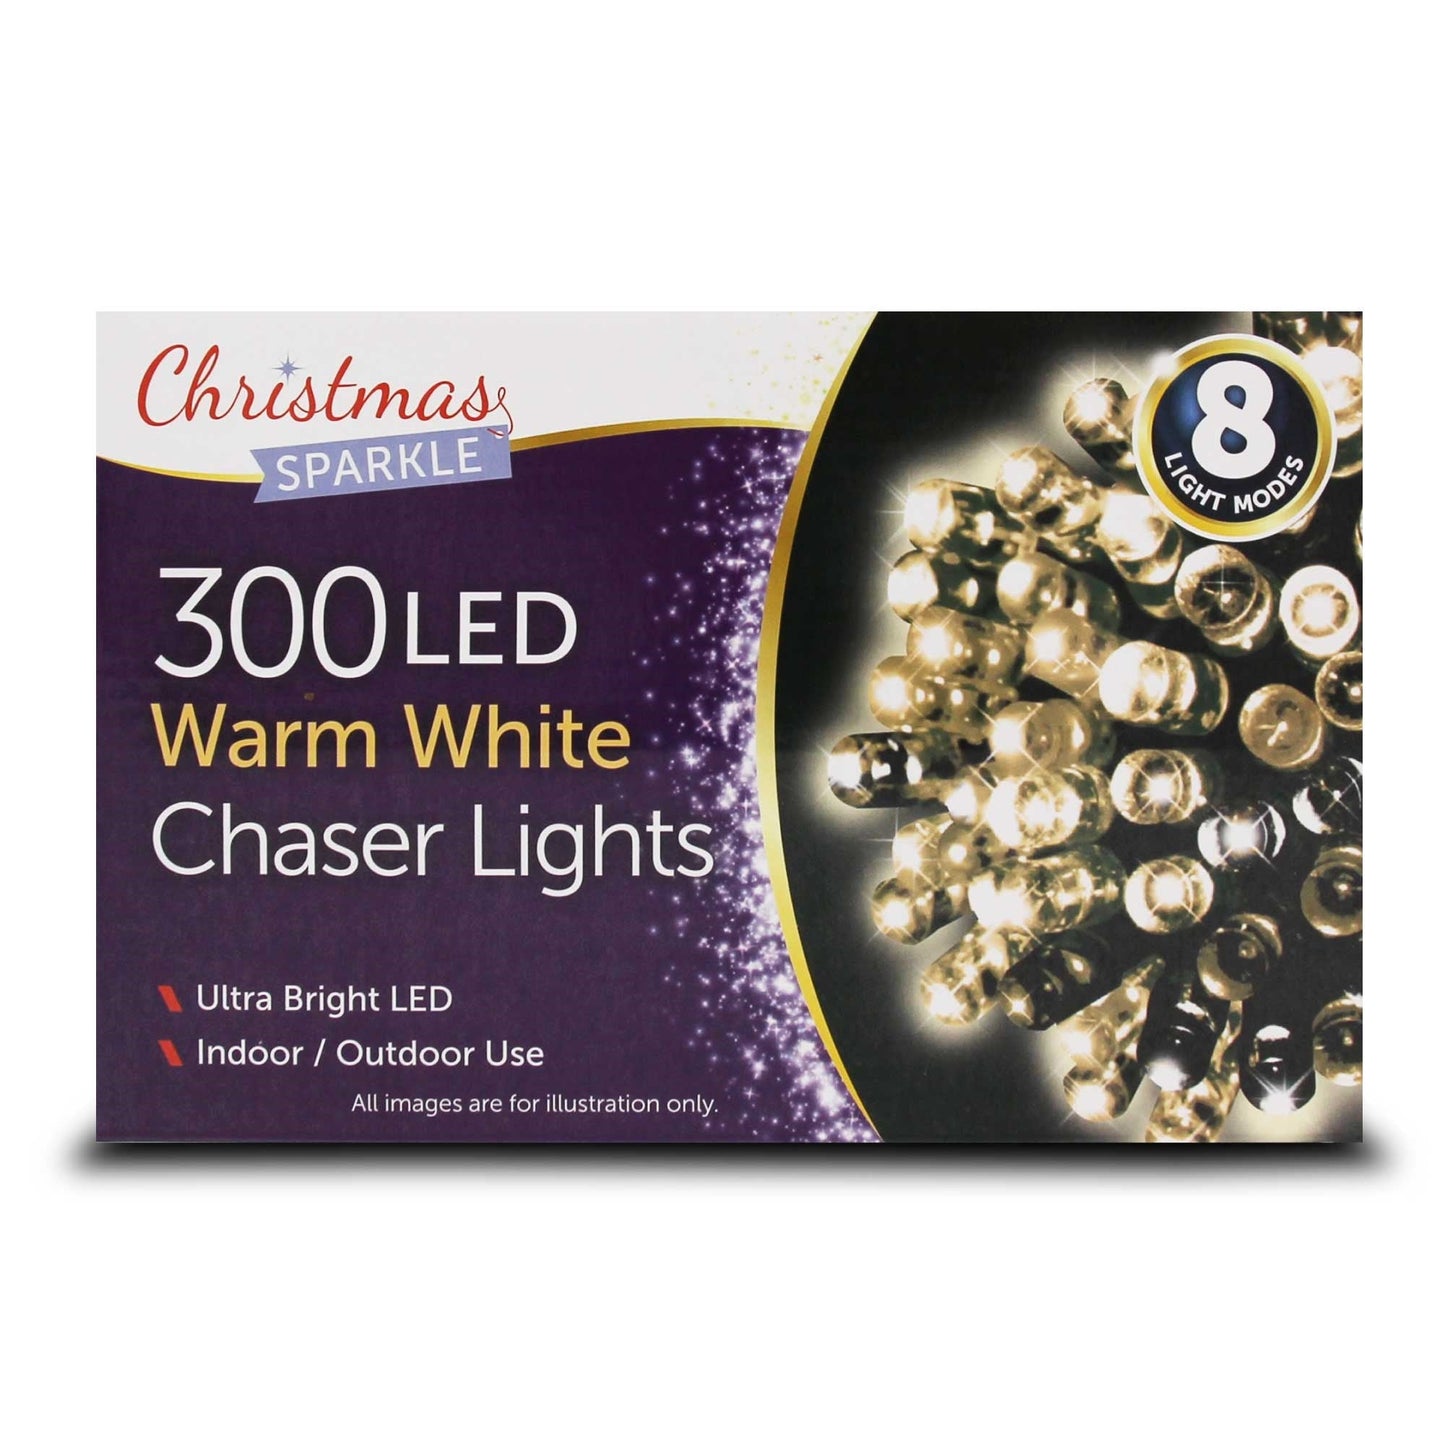 Christmas Sparkle Indoor and Outdoor Chaser Lights x 300 Warm White LEDs - Mains Operated